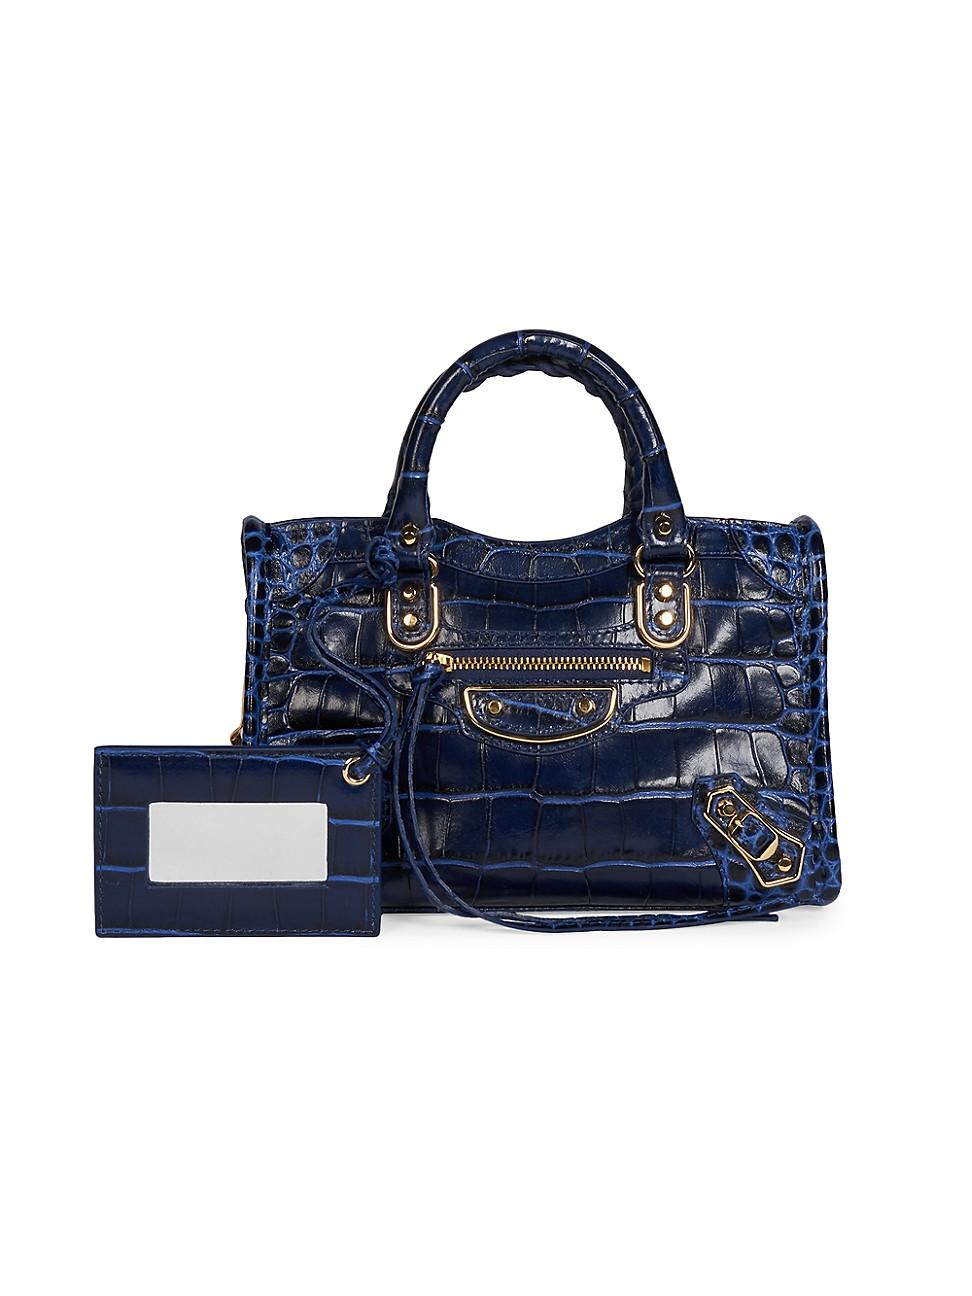 Balenciaga Small City Croc-embossed Leather Satchel in Blue | Lyst